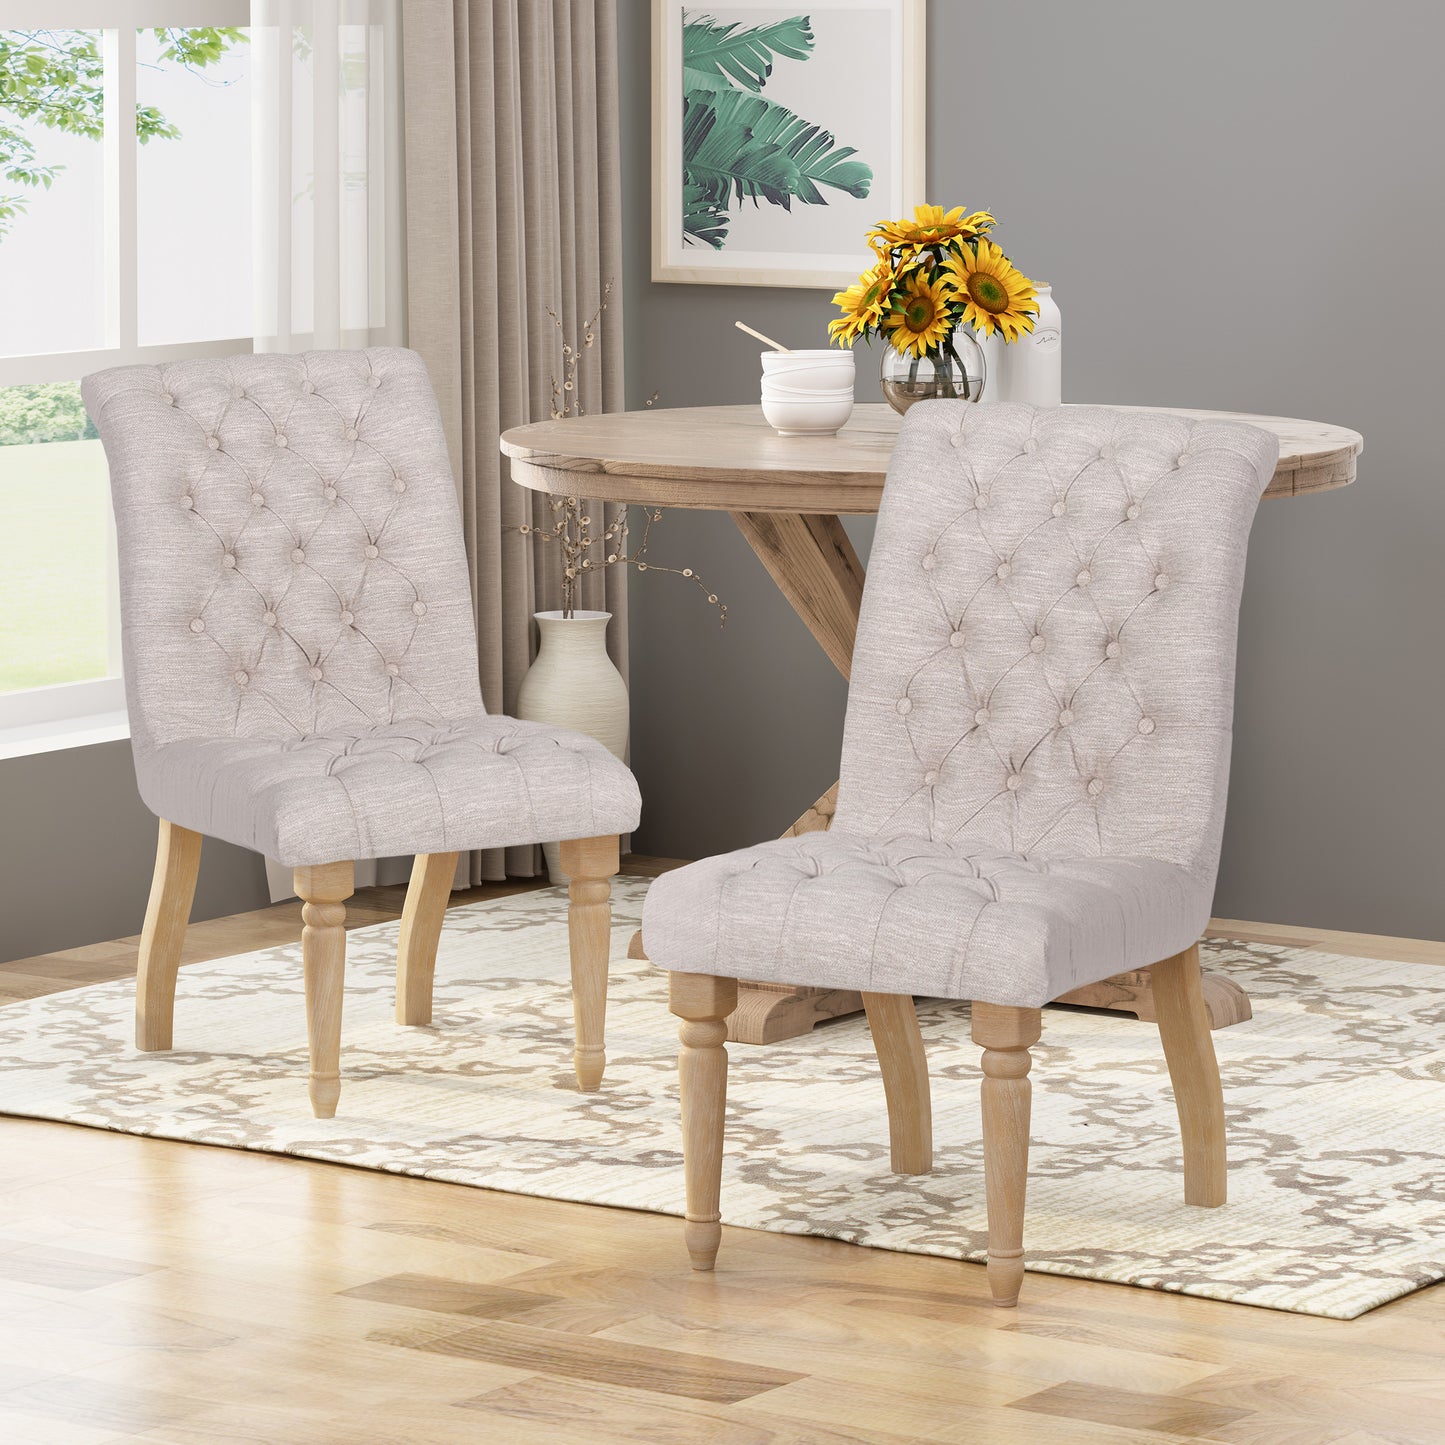 Terrance Tufted Fabric Dining Chair (Set of 2)